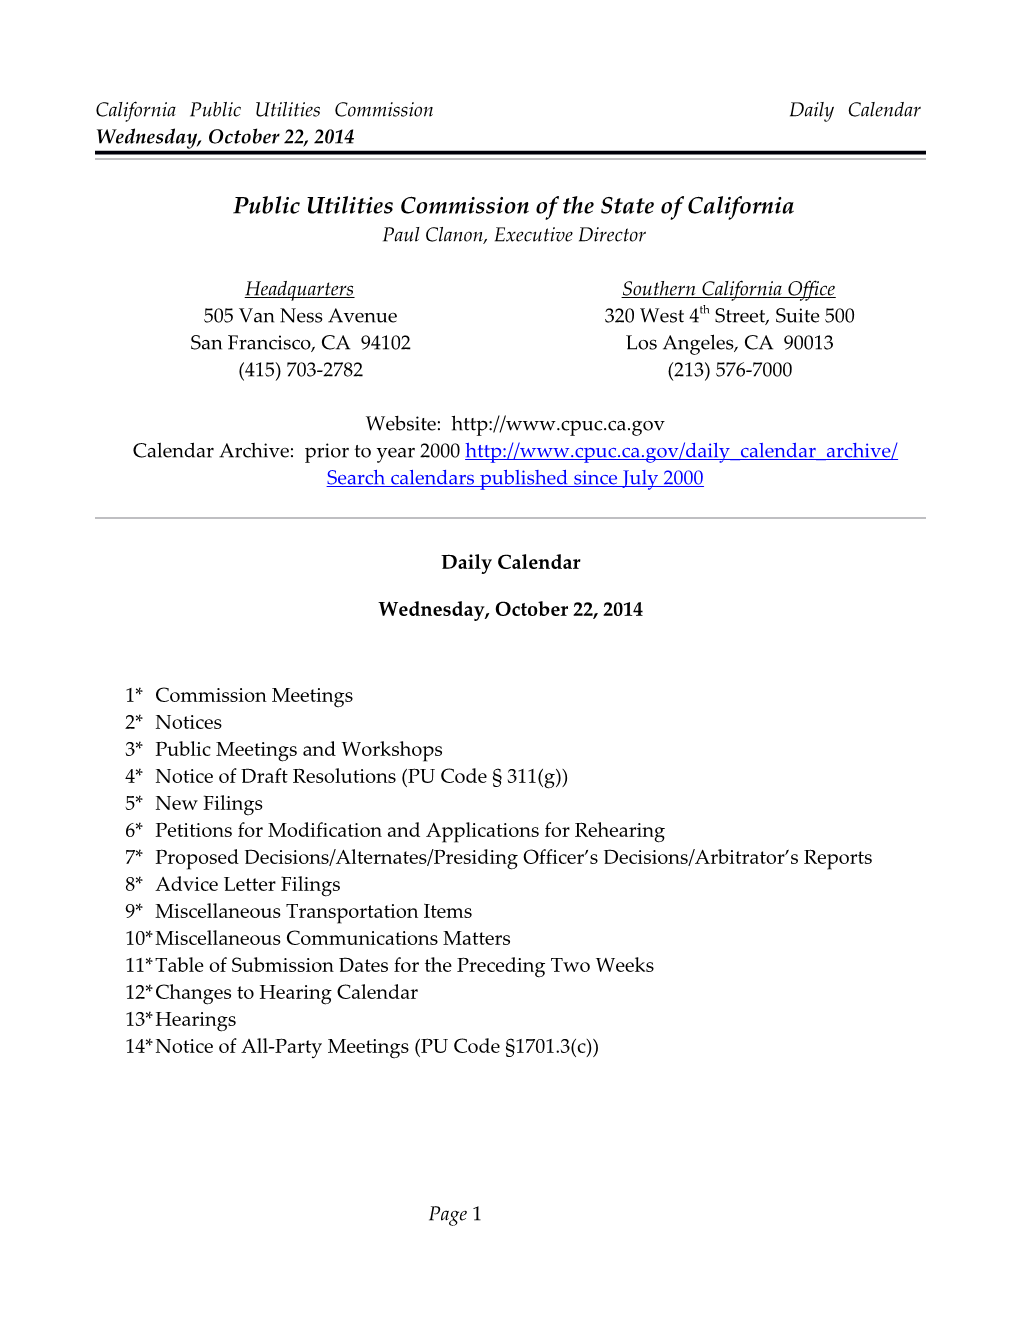 California Public Utilities Commission Daily Calendar Wednesday, October 22, 2014